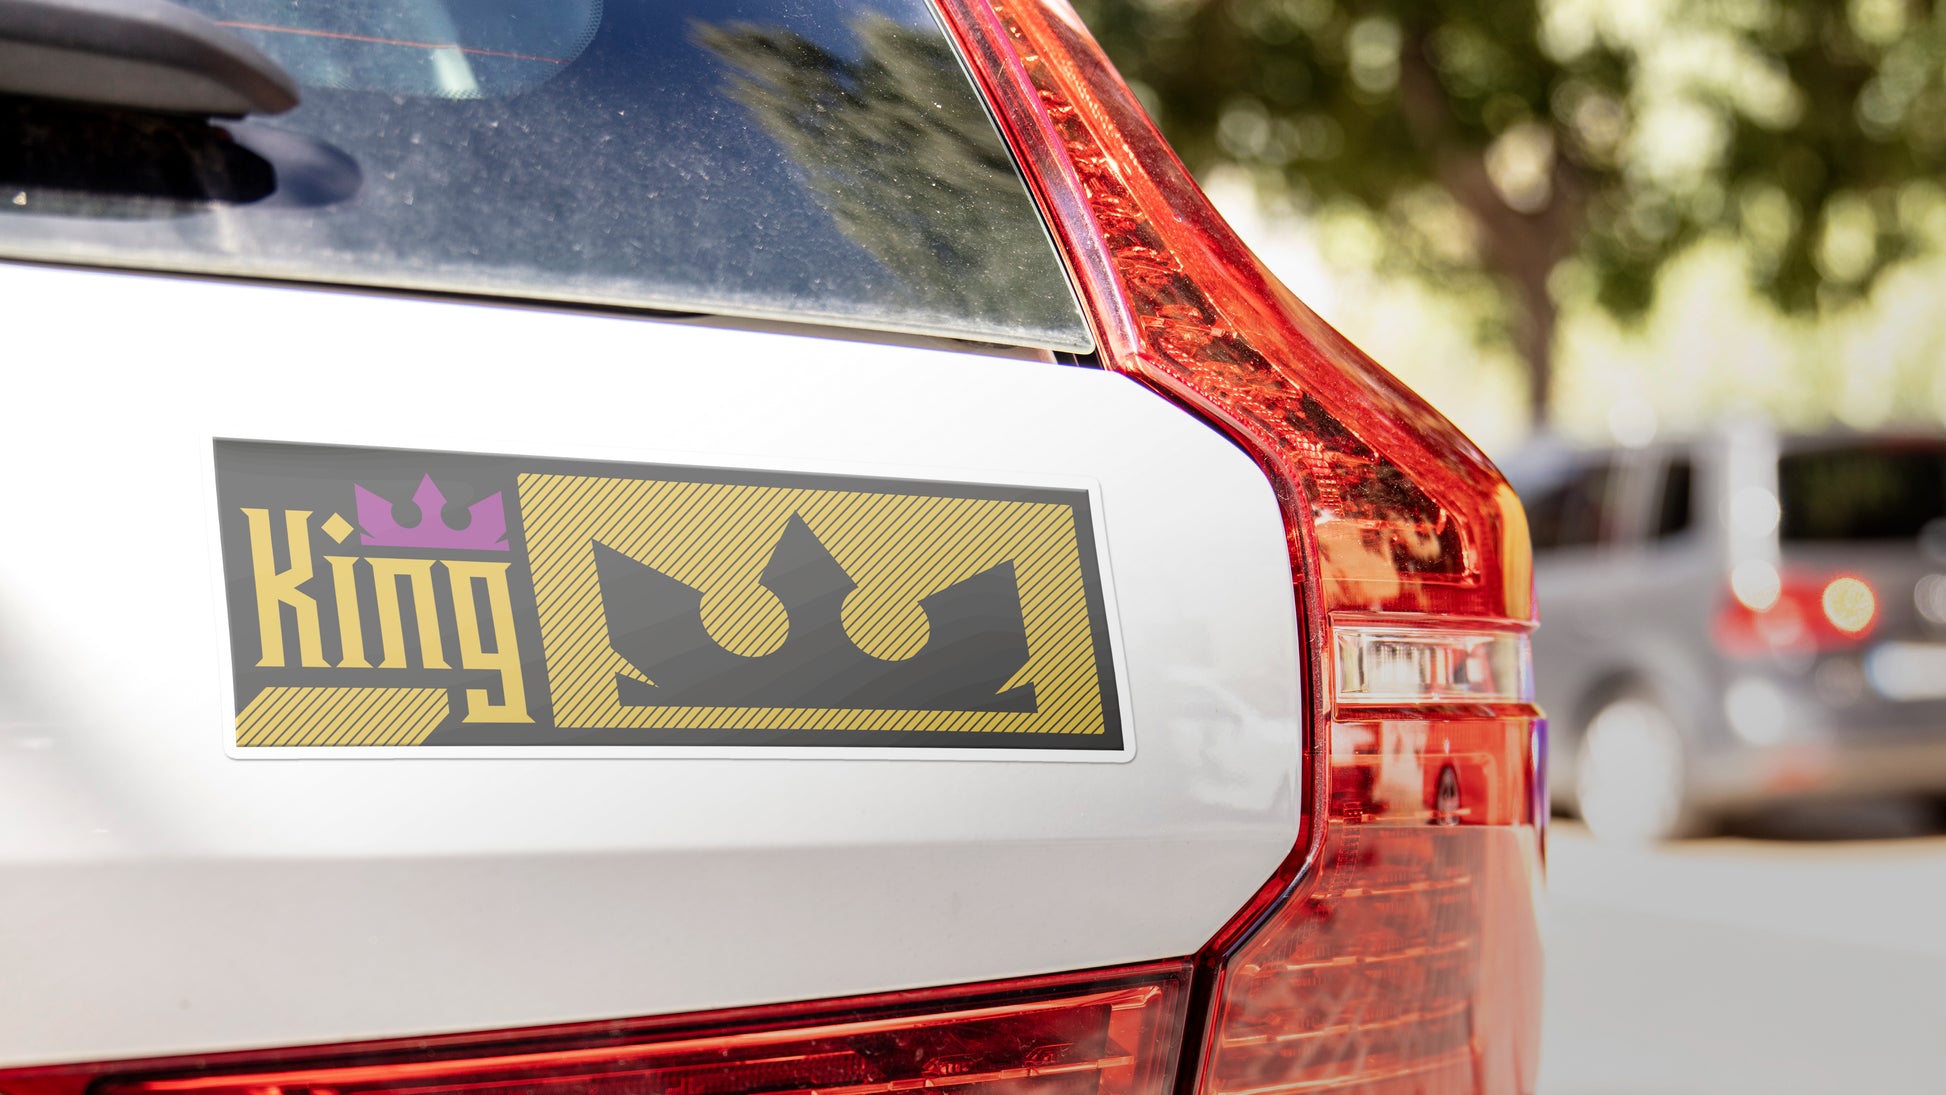 Rectangle car magnet with king car logo applied to a bumper